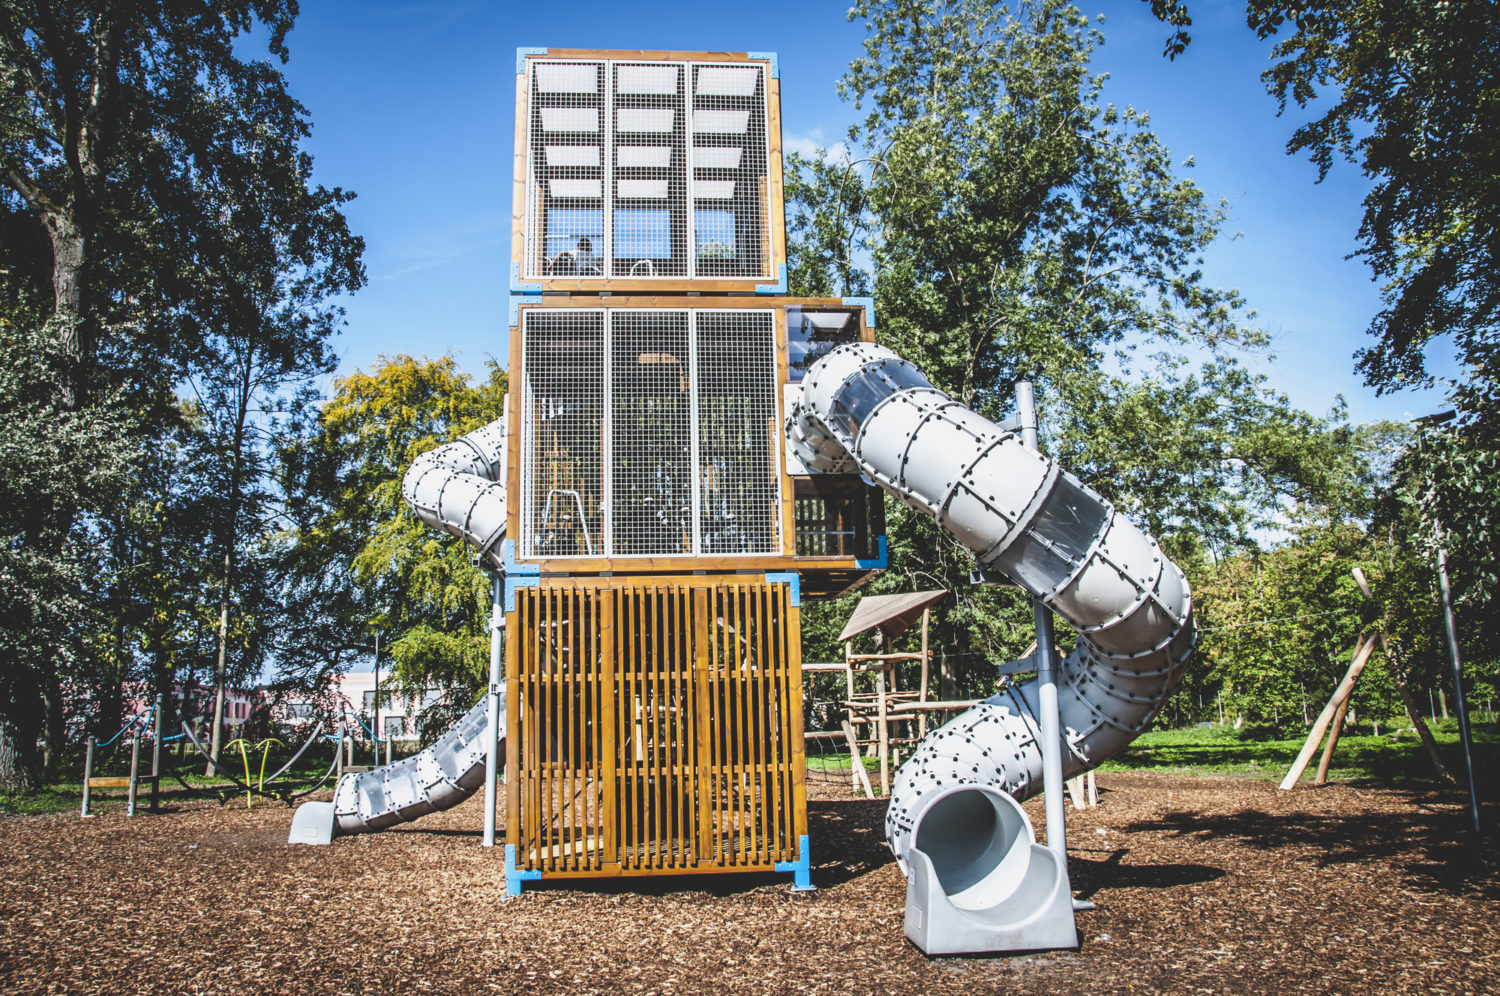 large climbing unit in playground with slides